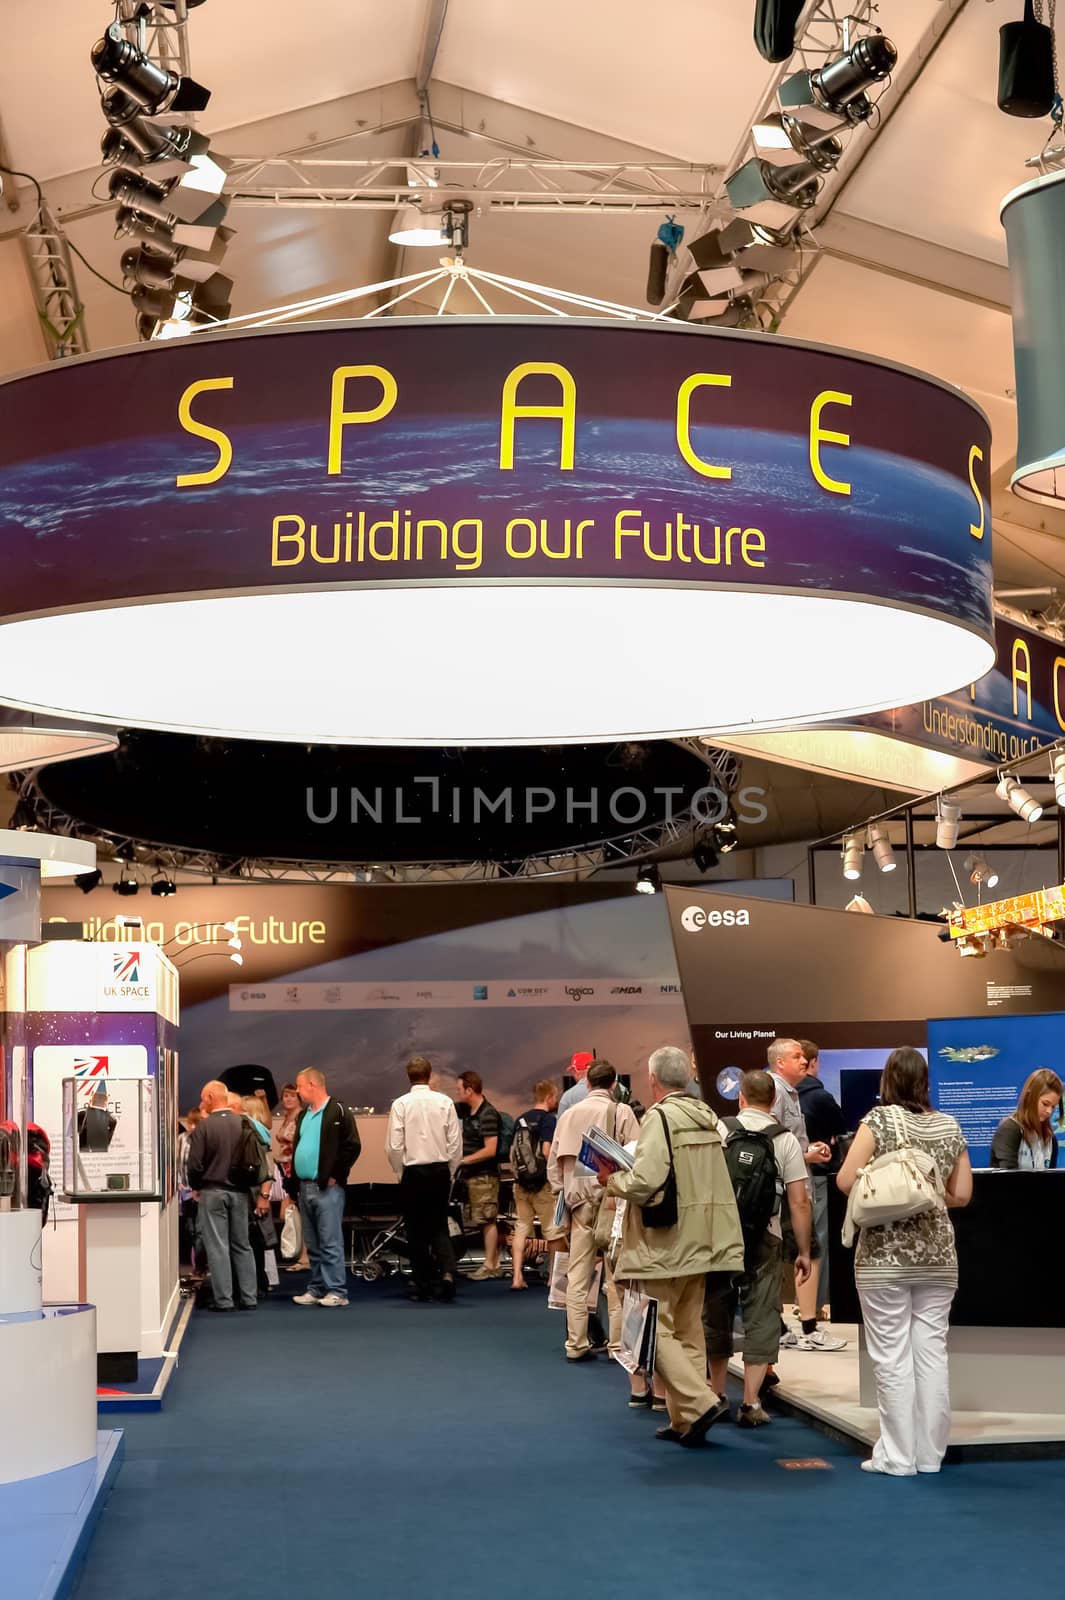 FARNBOROUGH, UK - JULY 25, 2010: Exhibition on the future of space exploration and technology and the farnborough Airshow, UK